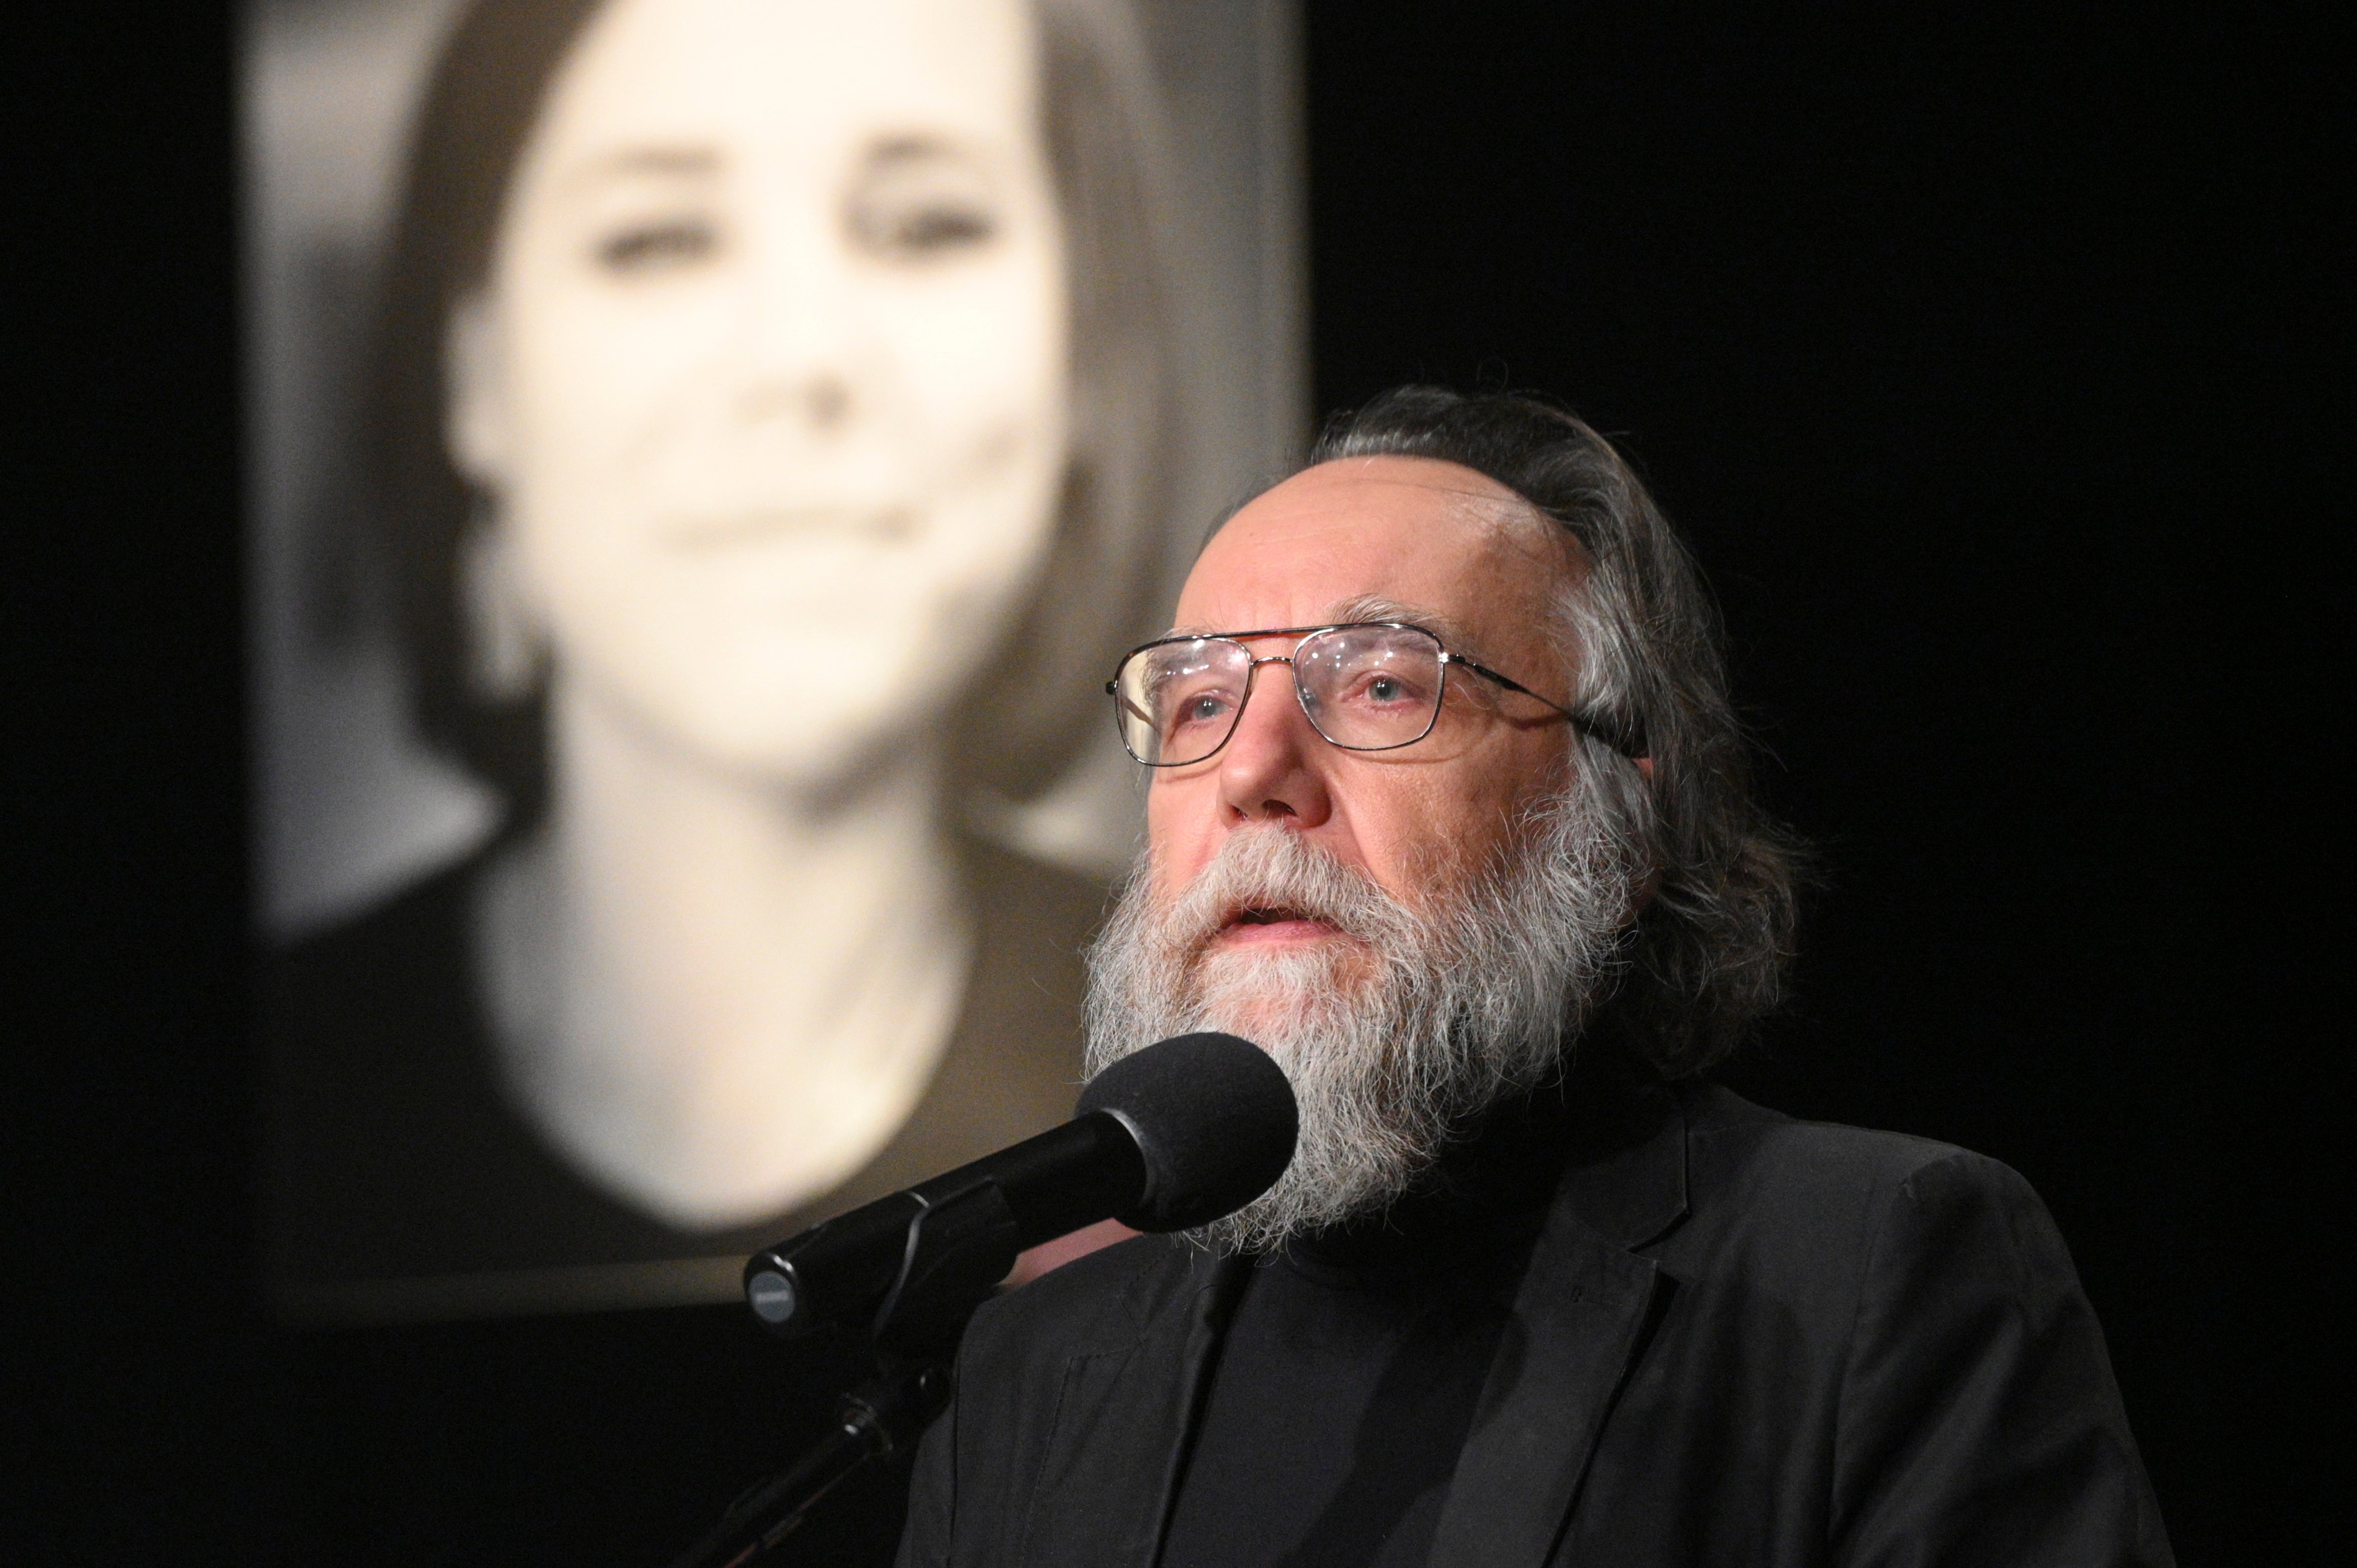 Nationalist Alexander Dugin speaks during the final farewell ceremony for his daughter Daria Dugina in Moscow